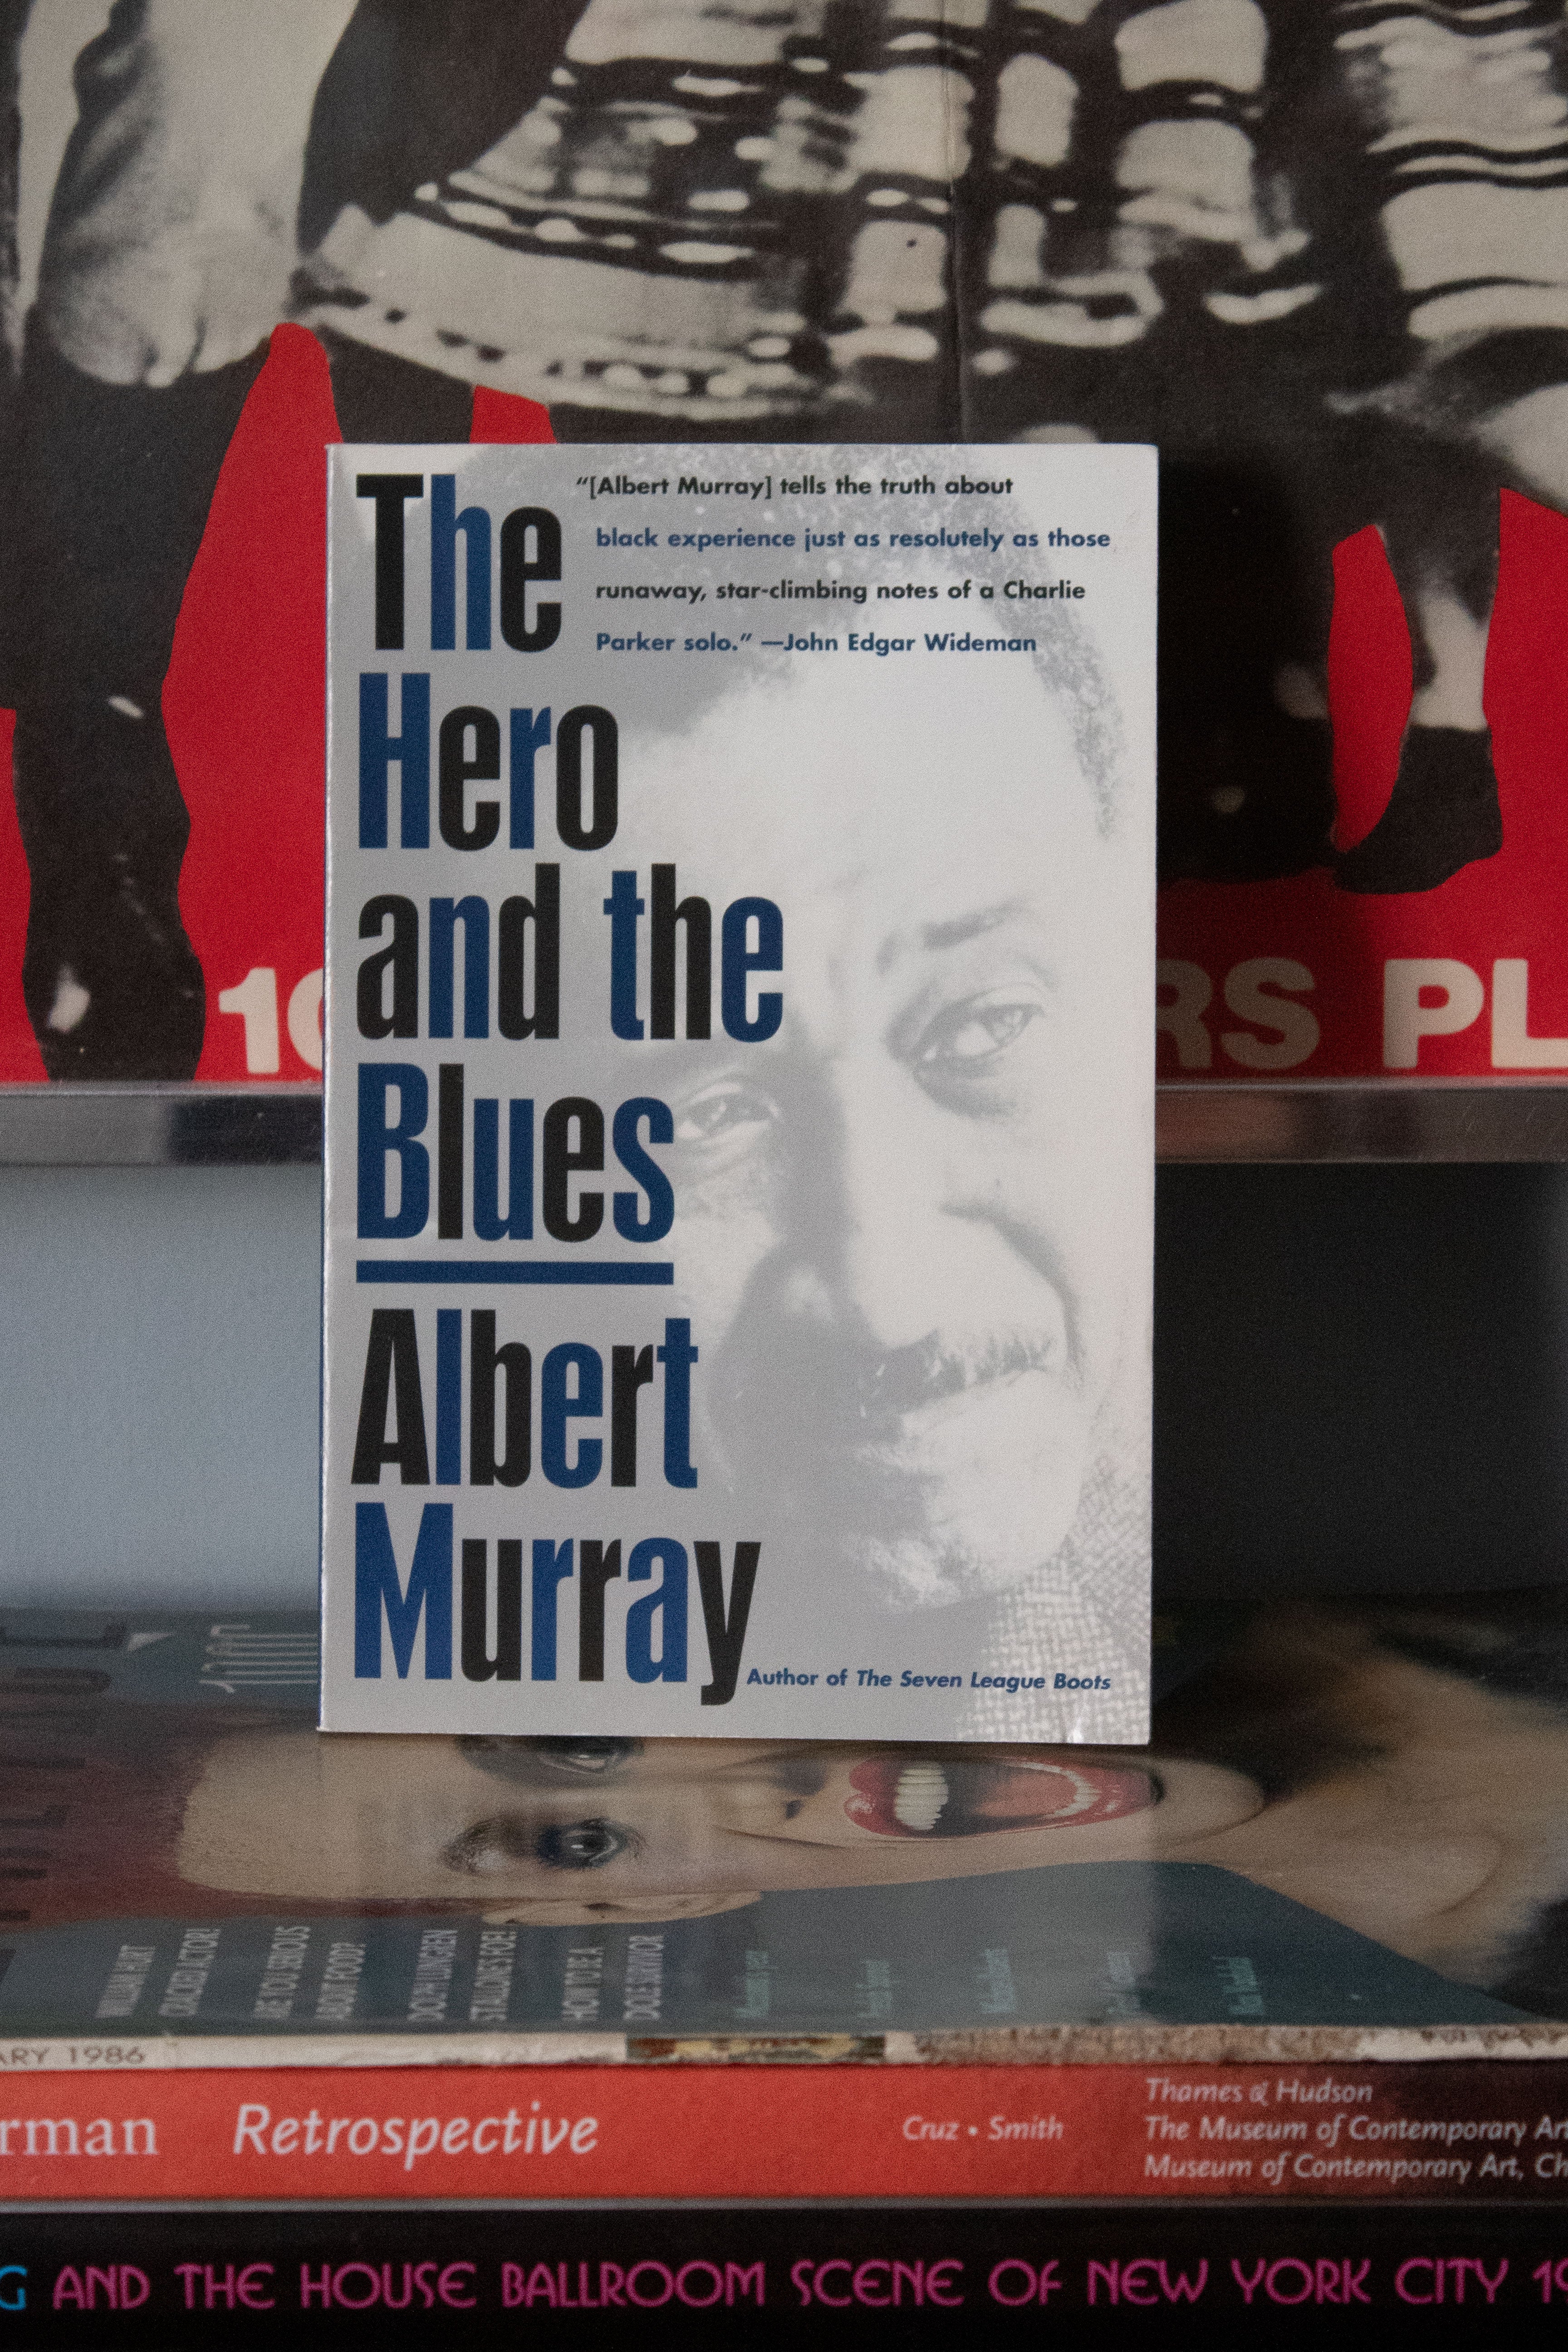 "The Hero and the Blues" by Albert Murray